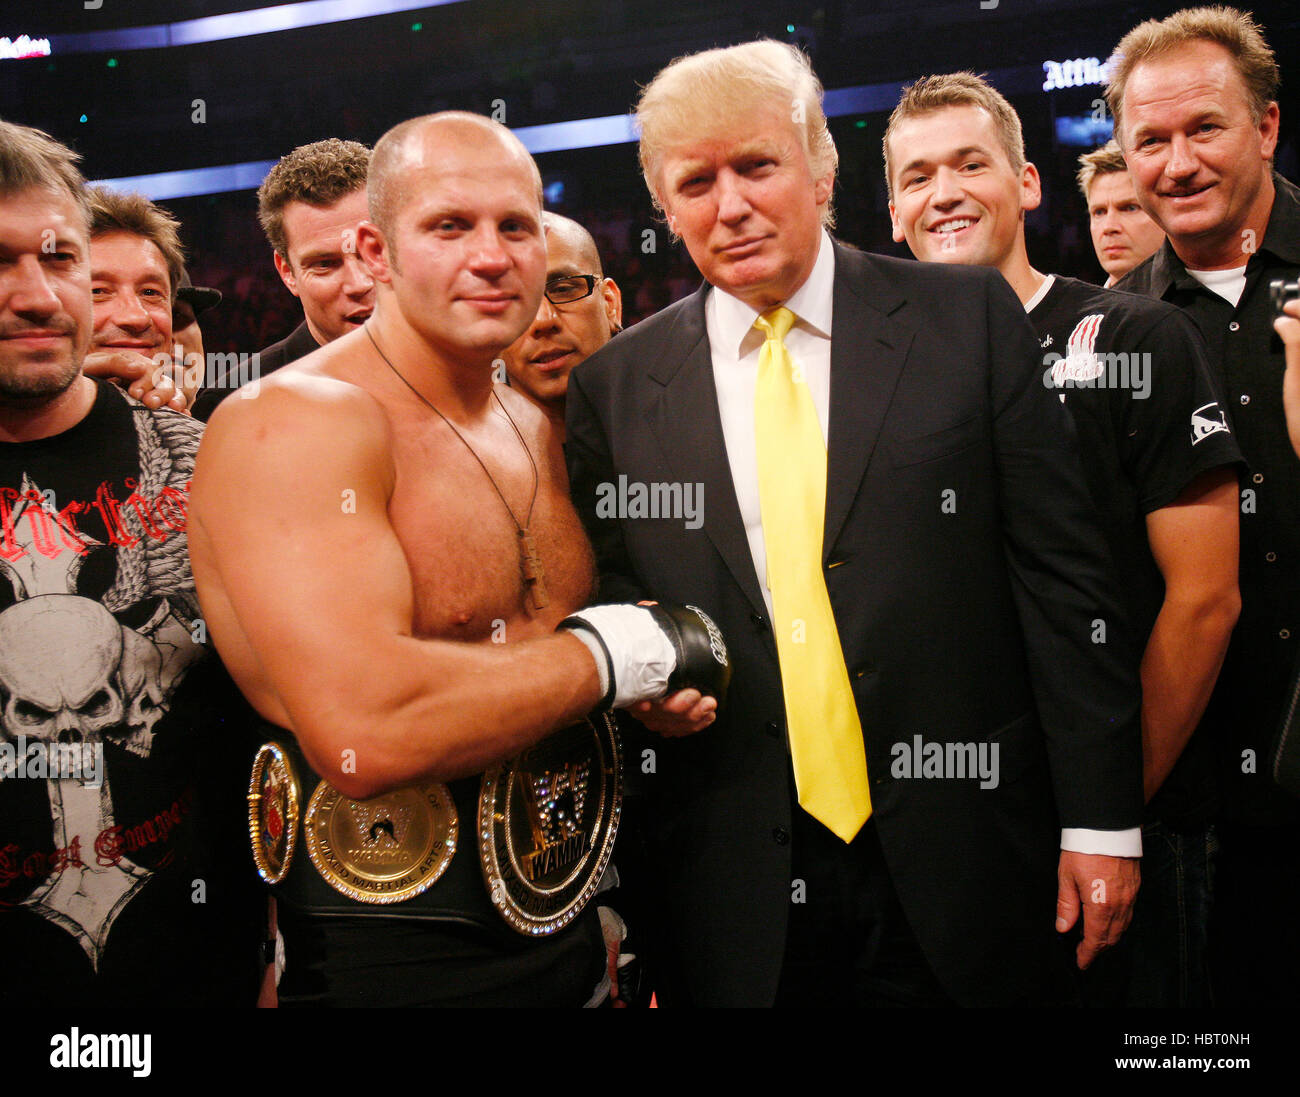 Fedor Emelianenko poses with Donald Trump in the ring after defeating Tim  Sylvia at Affliction's "Banned", a mixed martial arts fight at the Honda  Center on July 19, 2008 in Anaheim, California.